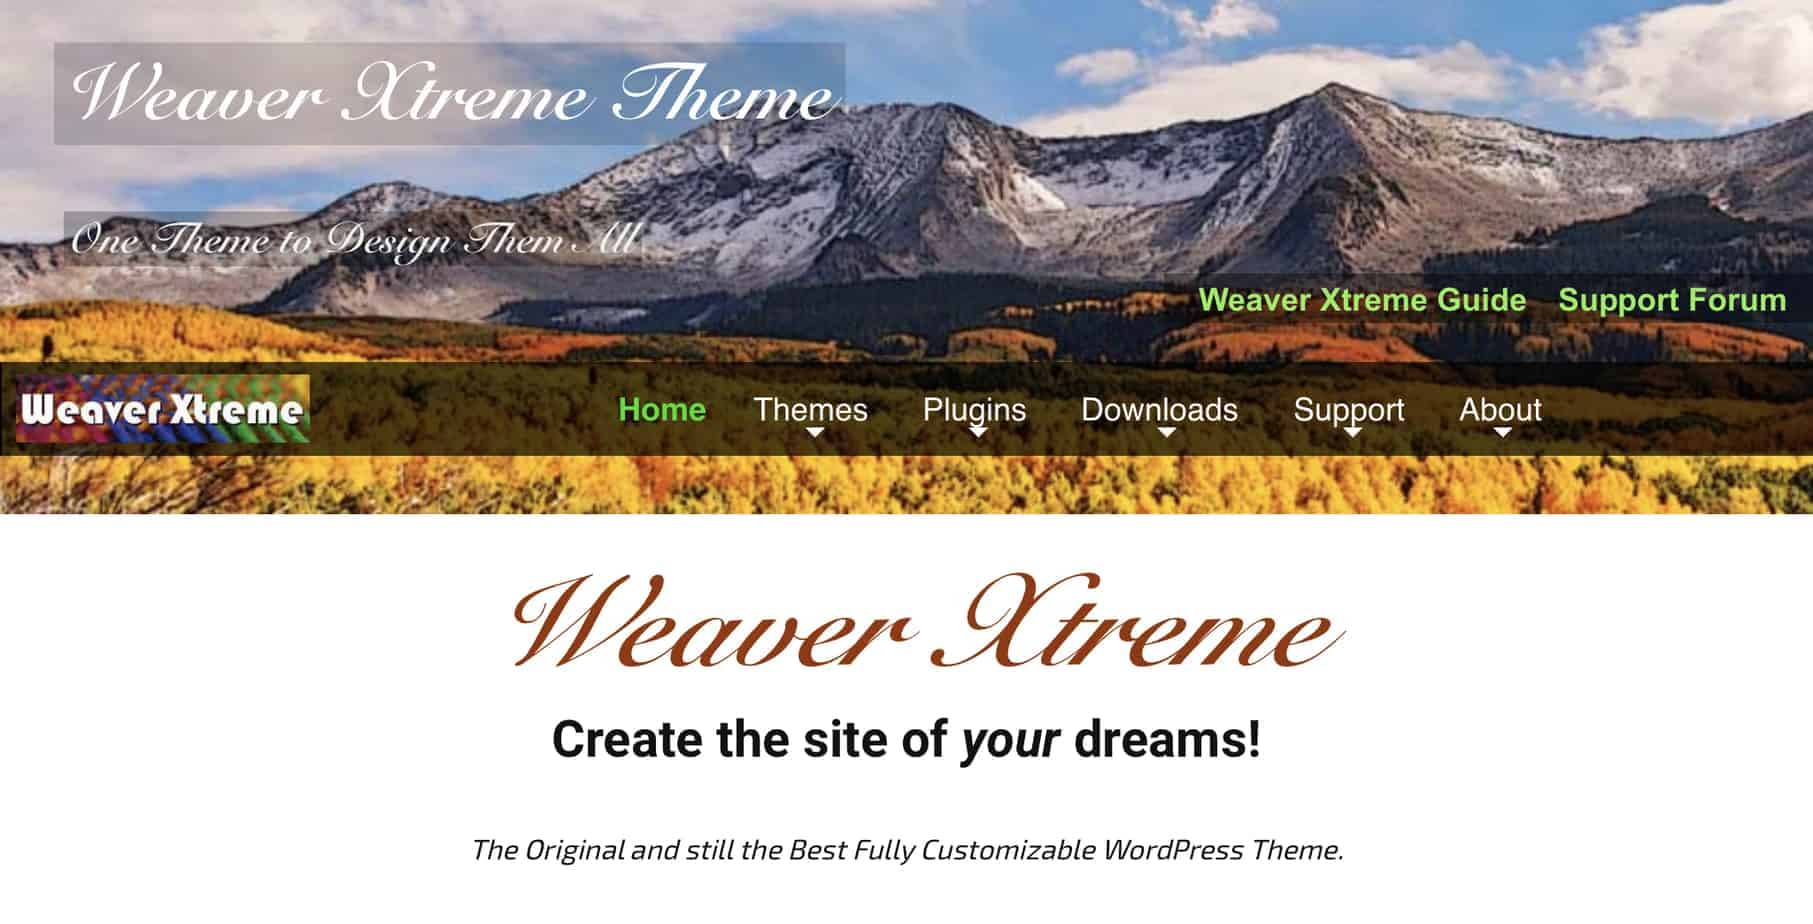 Testing the weaver theme. One of the best fully customizable and easy to use WordPress themes - Website